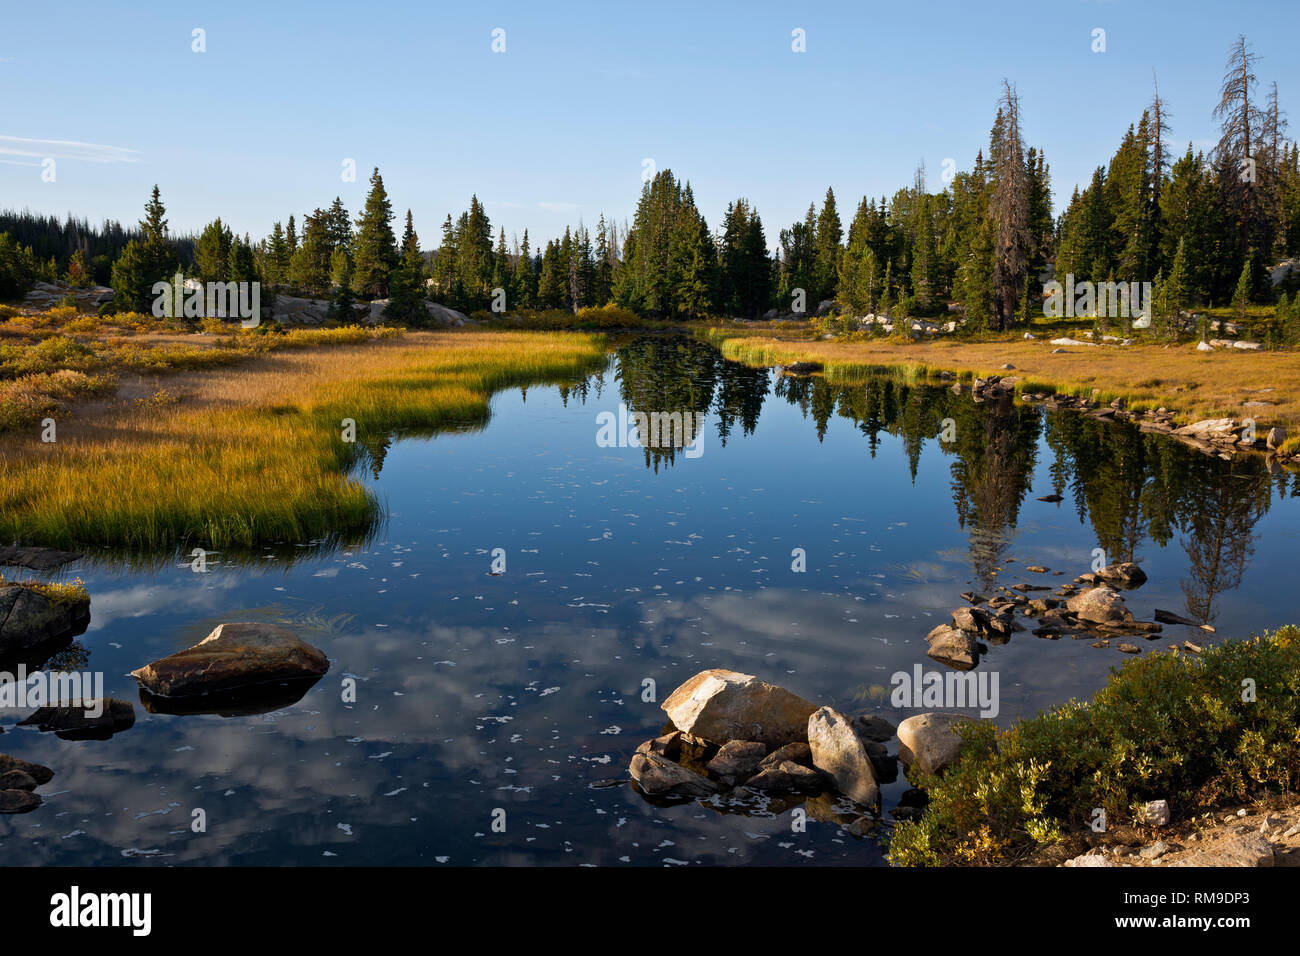 WY03717-00...WYOMING - Reflections in a small pond passed along the Beartooth Highway in the Shoshone National Forest. Stock Photo